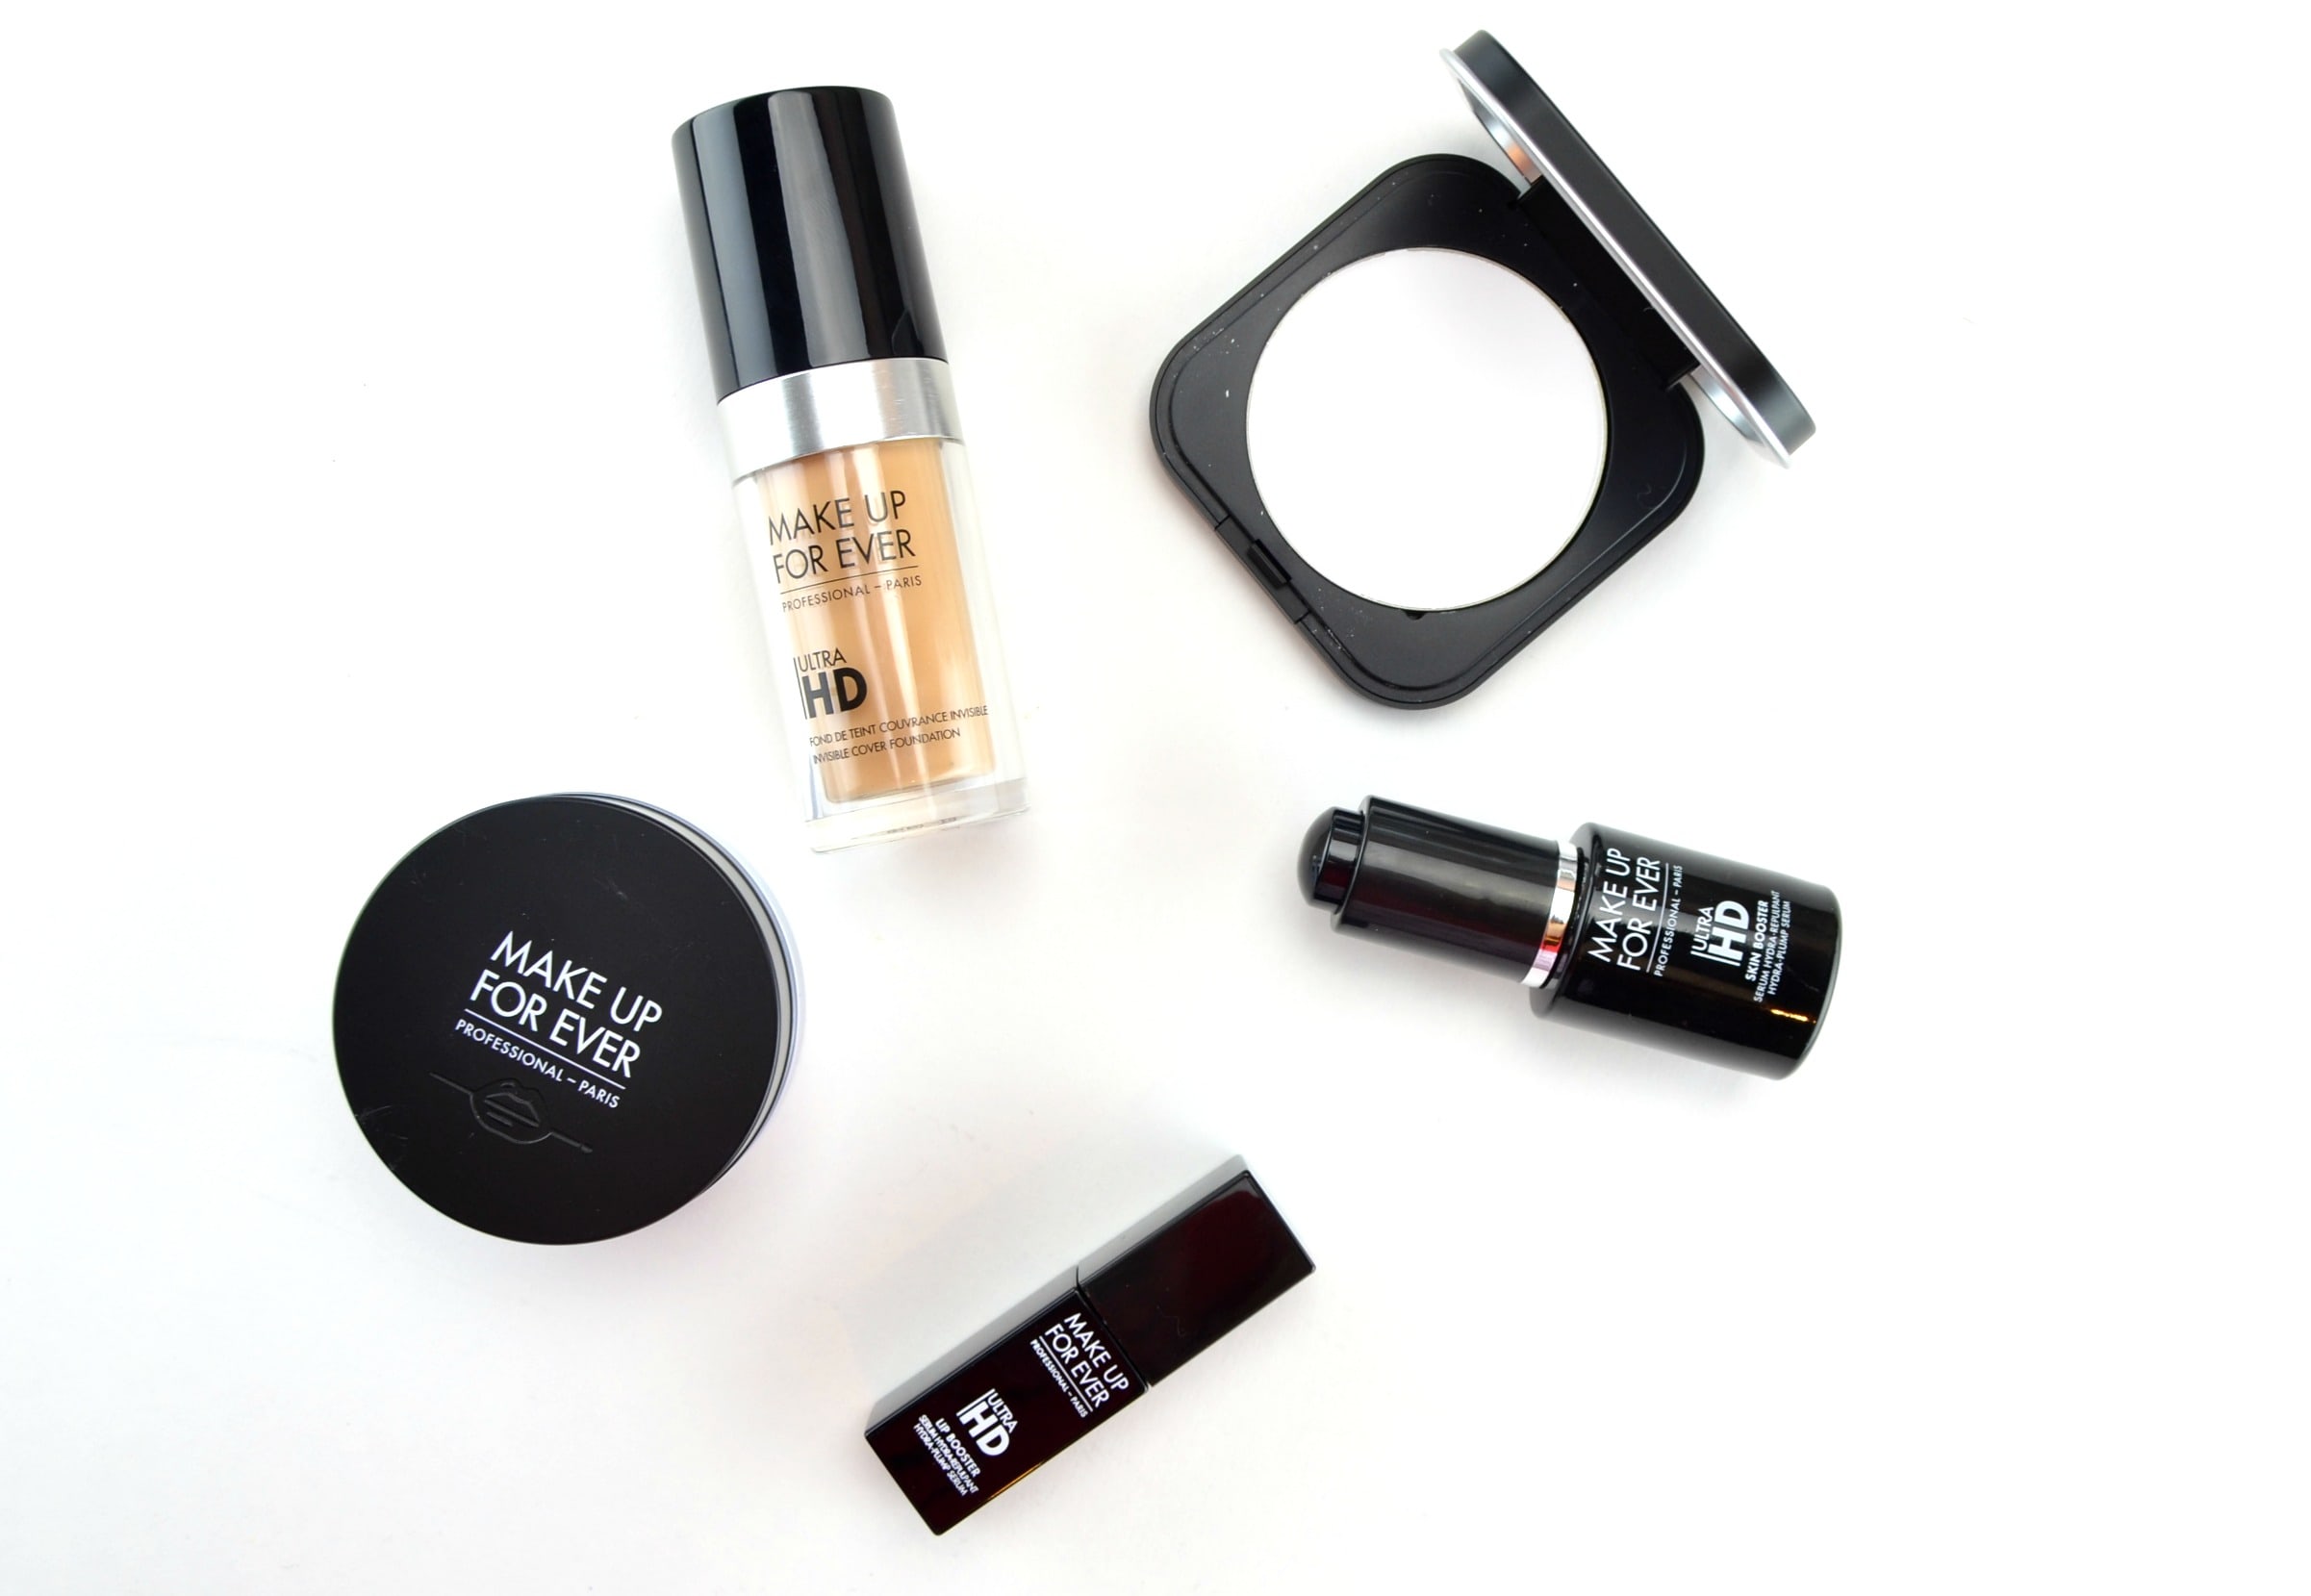 Ultra hd foundation makeup forever x 2